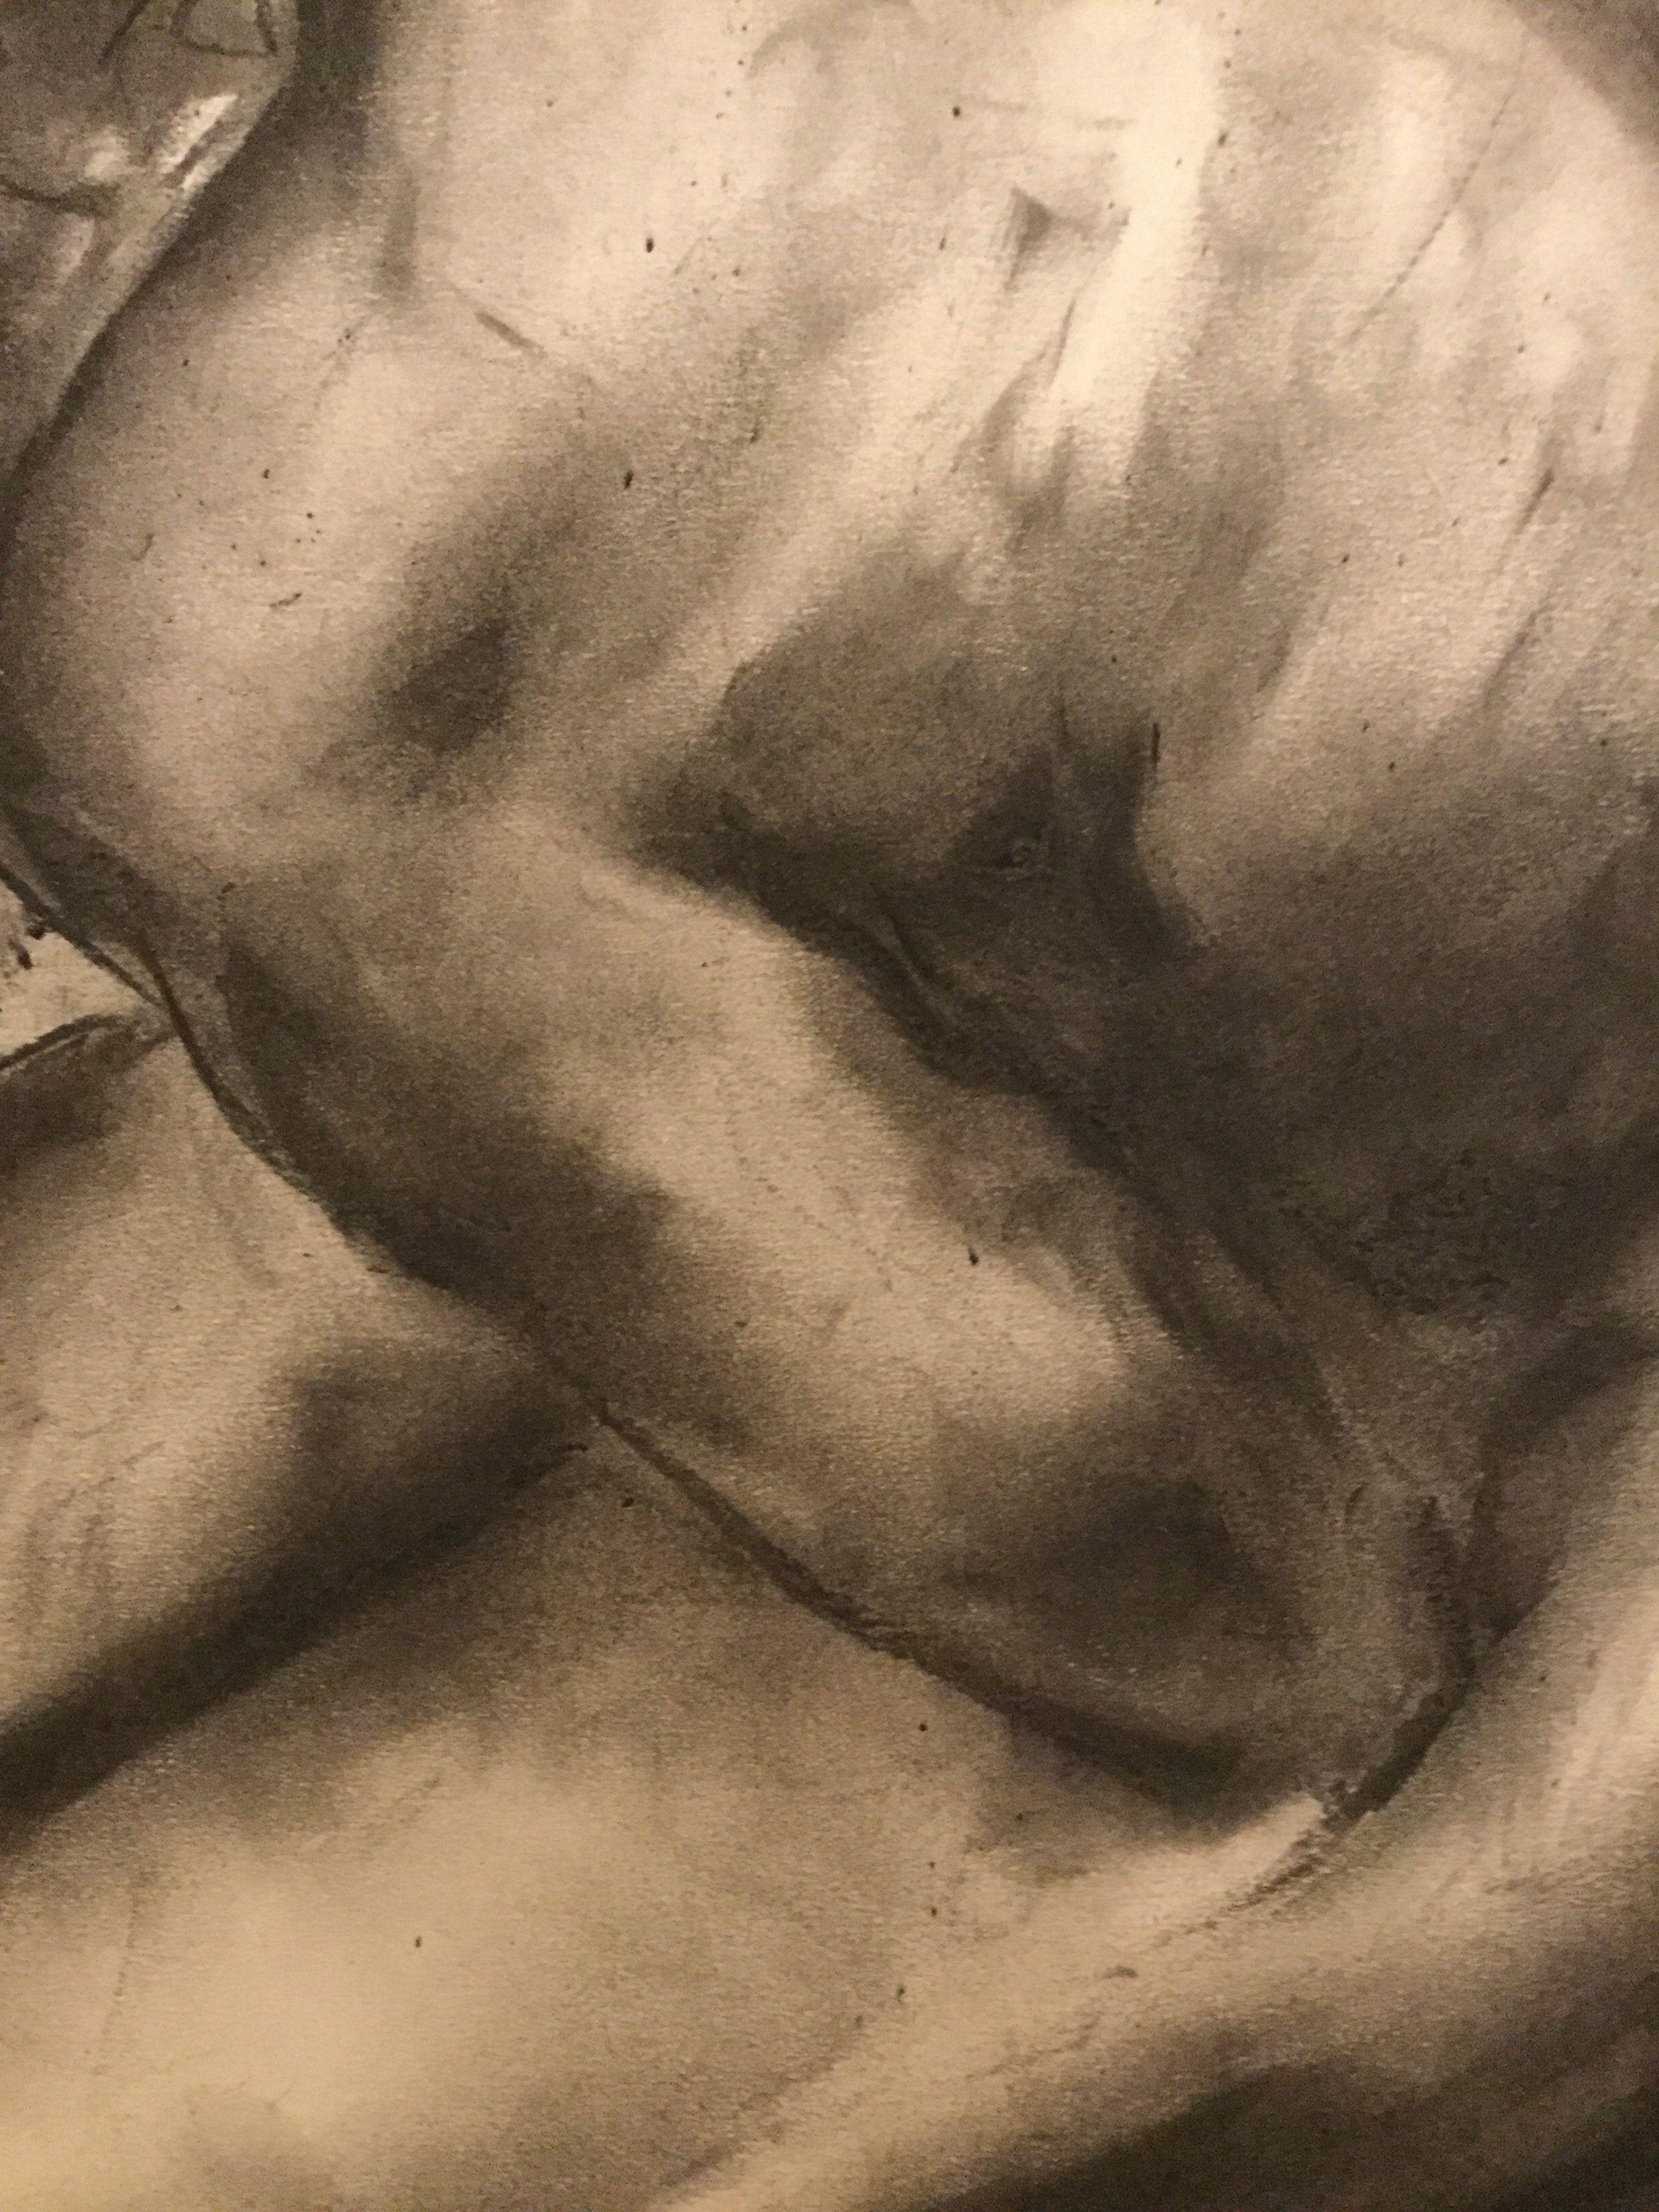 Original charcoal drawing on paper by James Shipton  My works are heavily influenced by the art work of Degas and Gustav Klimt.  My desire is to capture the beauty of the female human form, whilst portraying human isolation. I achieve this through a